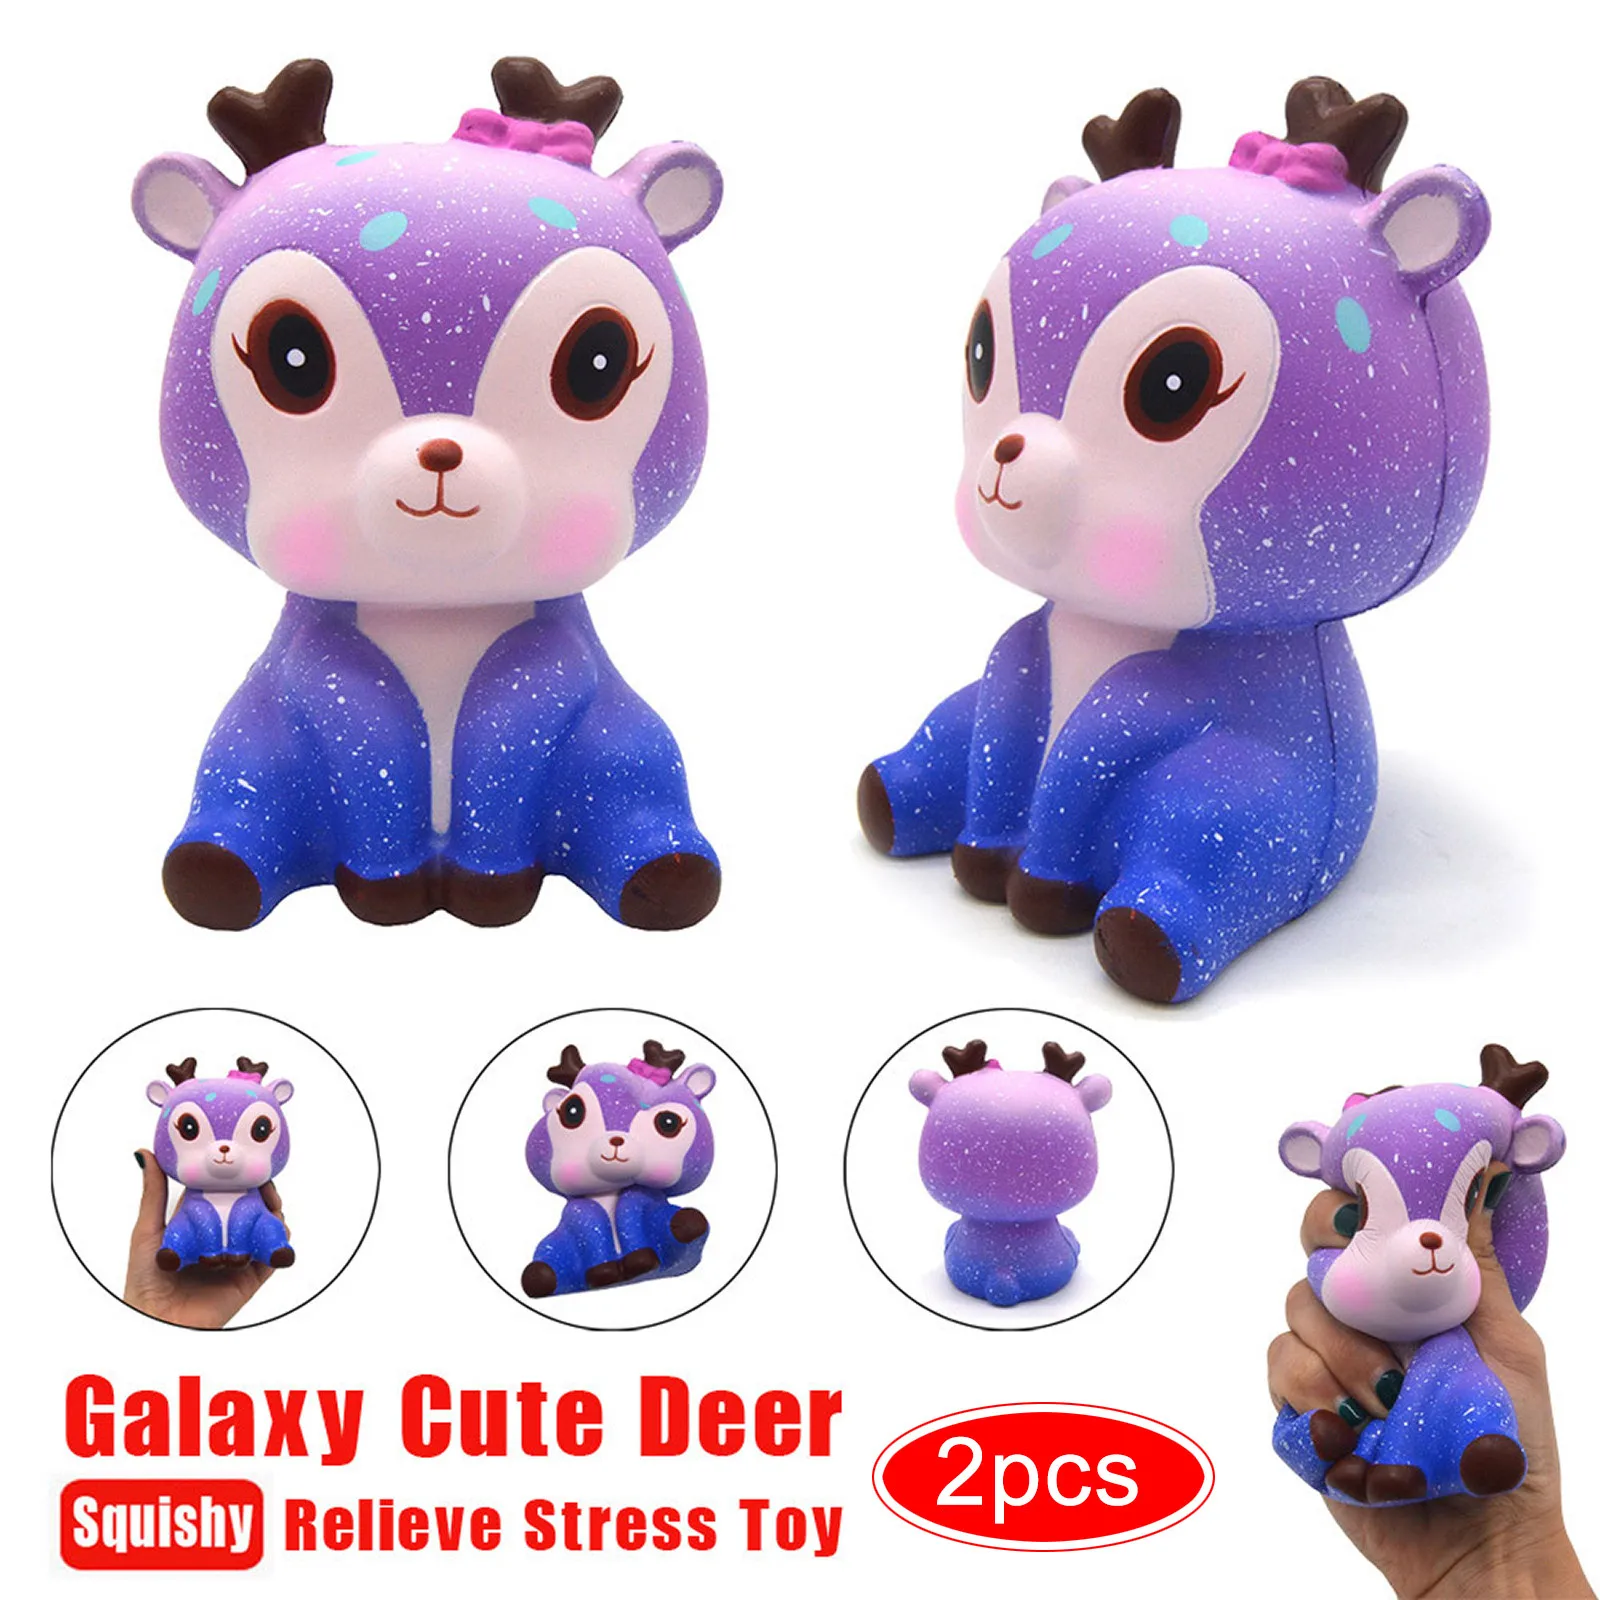 

2PC Squishy Toy Decompression Kids Gift Kawaii Cartoon Galaxy Deer Slow Rising Cream Scented Stress Reliever Toys антистресс 5*